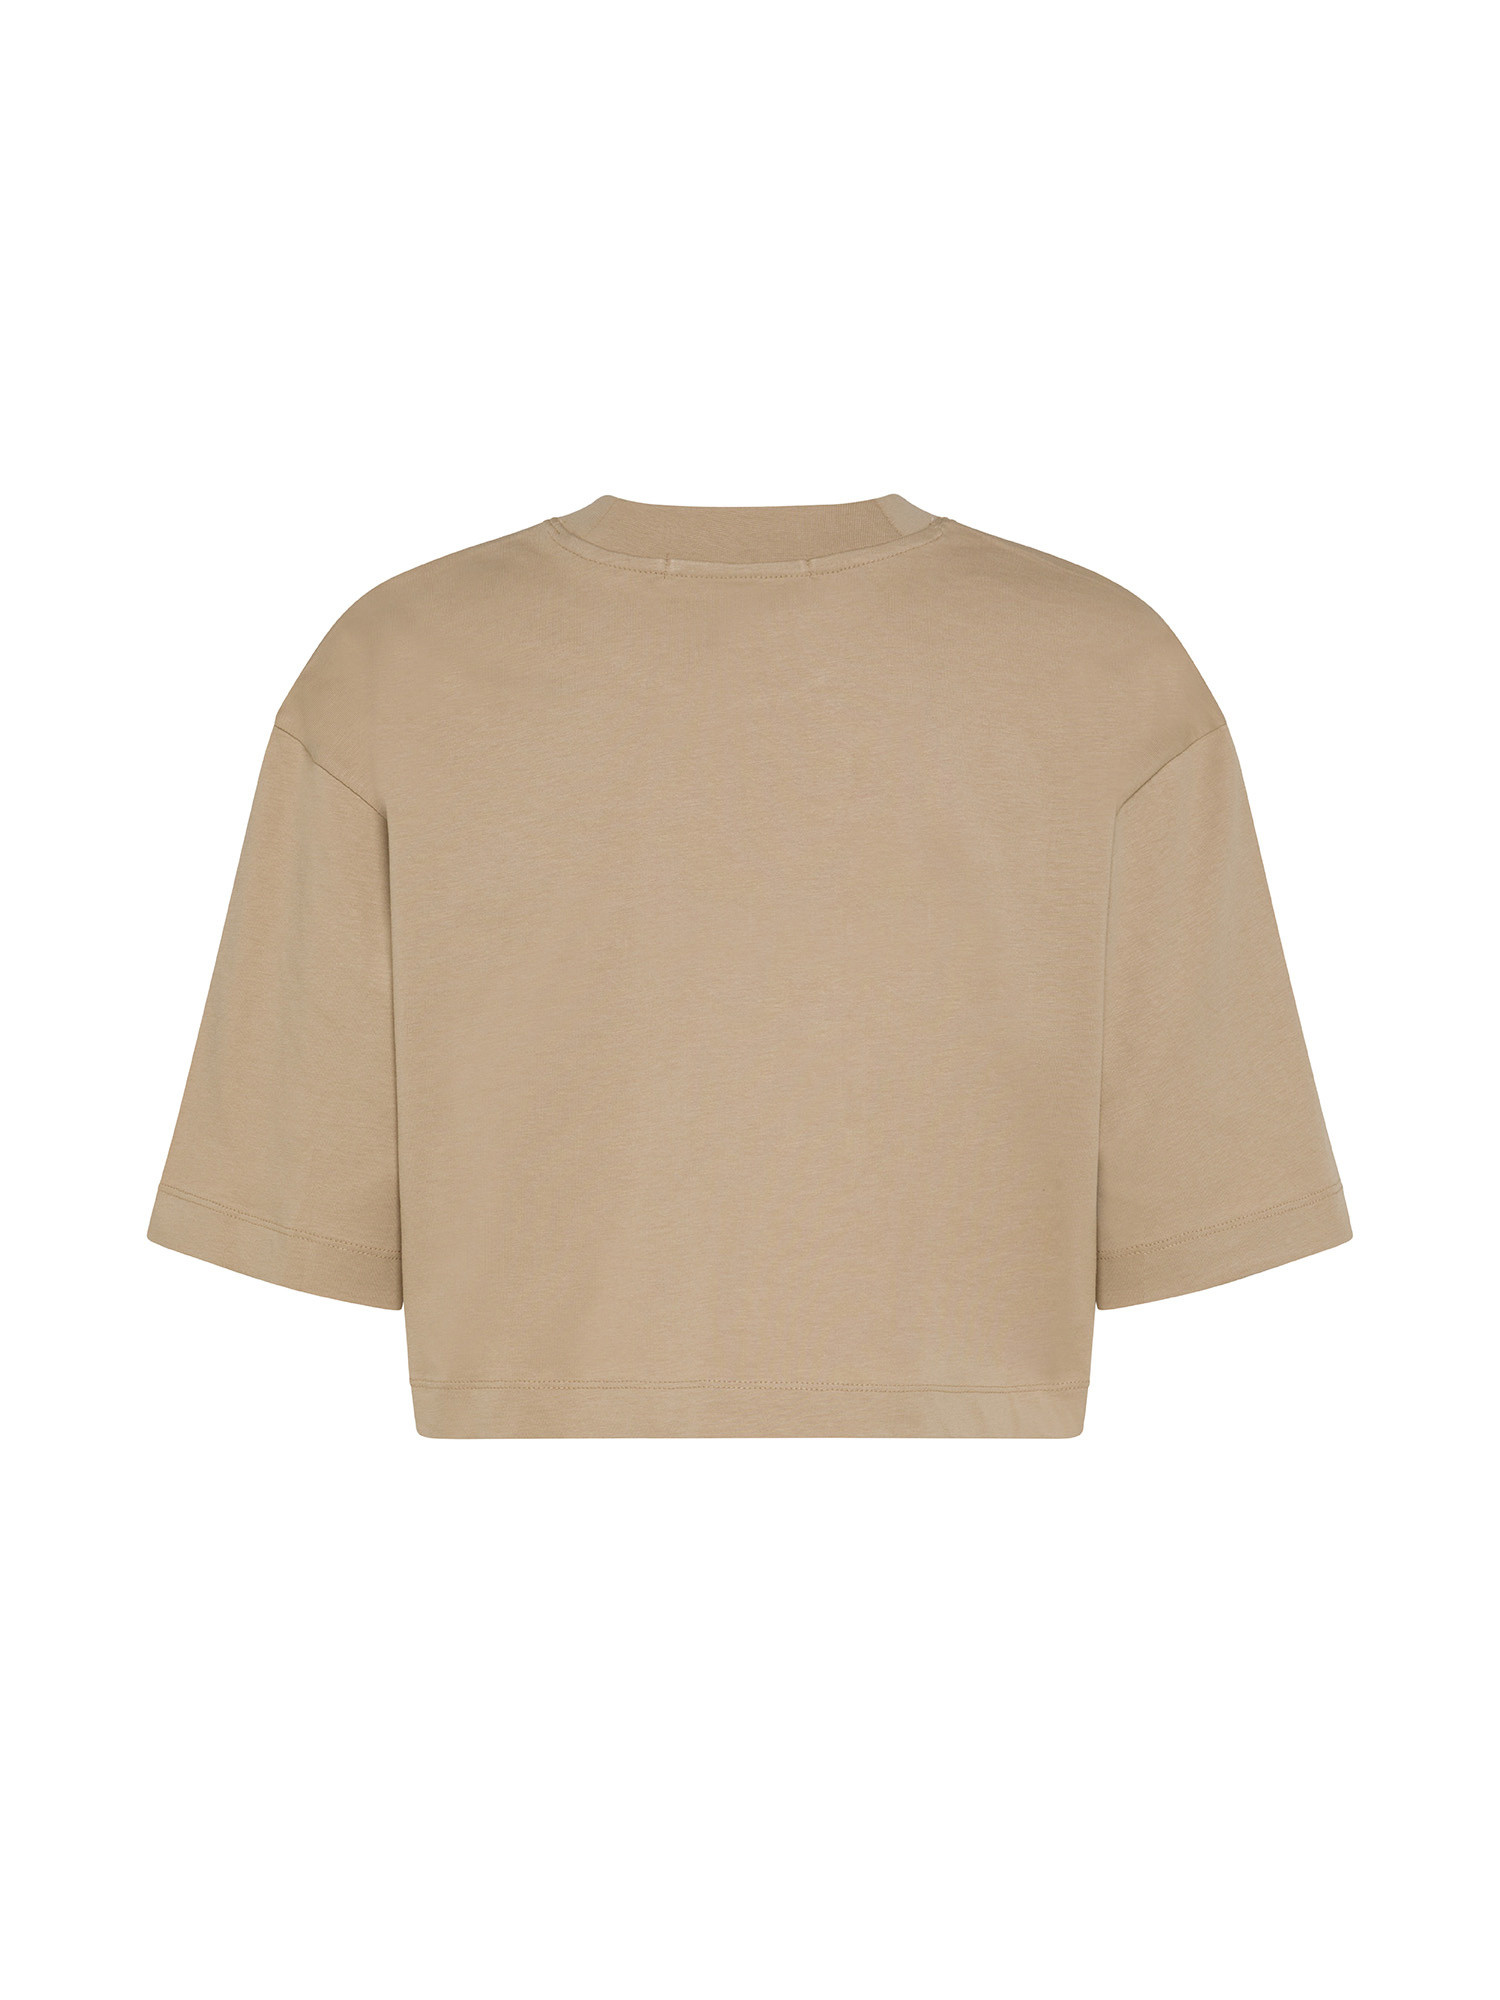 Calvin Klein Jeans - T-shirt crop in cotone con logo, Beige, large image number 1